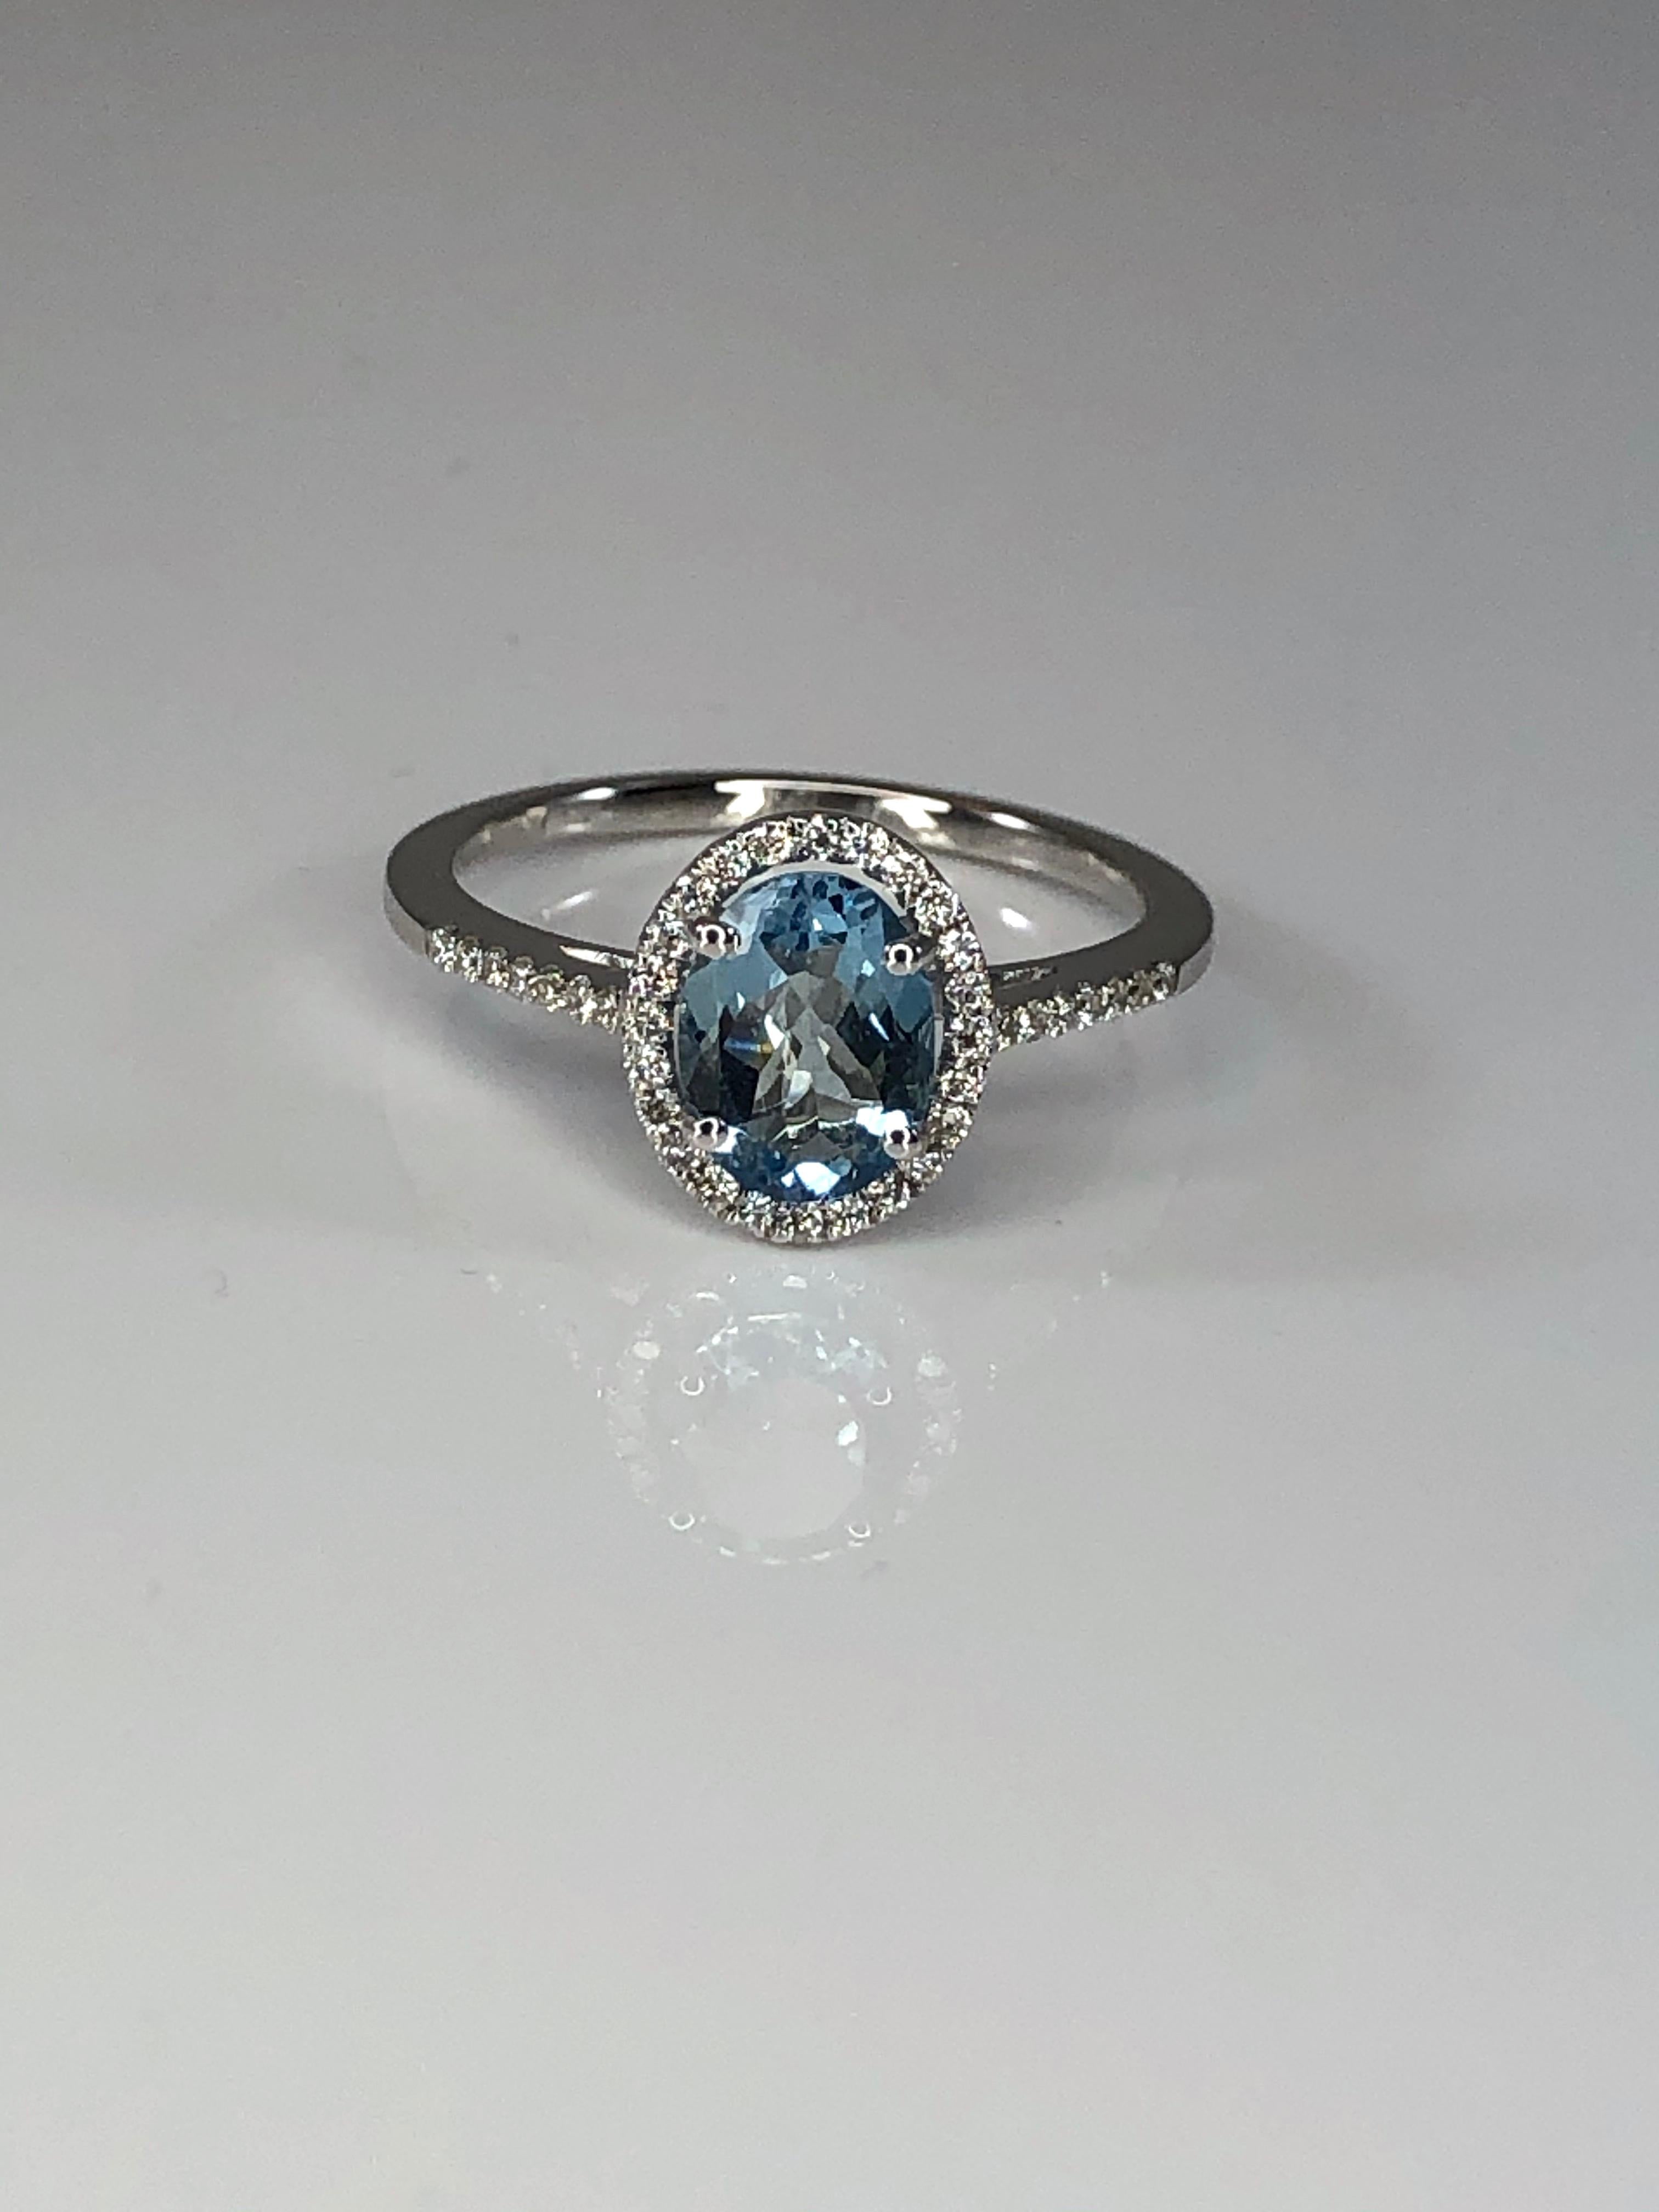 S.Georgios designer solitaire oval shape natural Aquamarine and diamond ring all handmade from 18 Karat White gold in Athens Greece. This gorgeous solitaire ring features a 1.11 Carat natural Aquamarine accompanied by Brilliant-cut White Diamonds